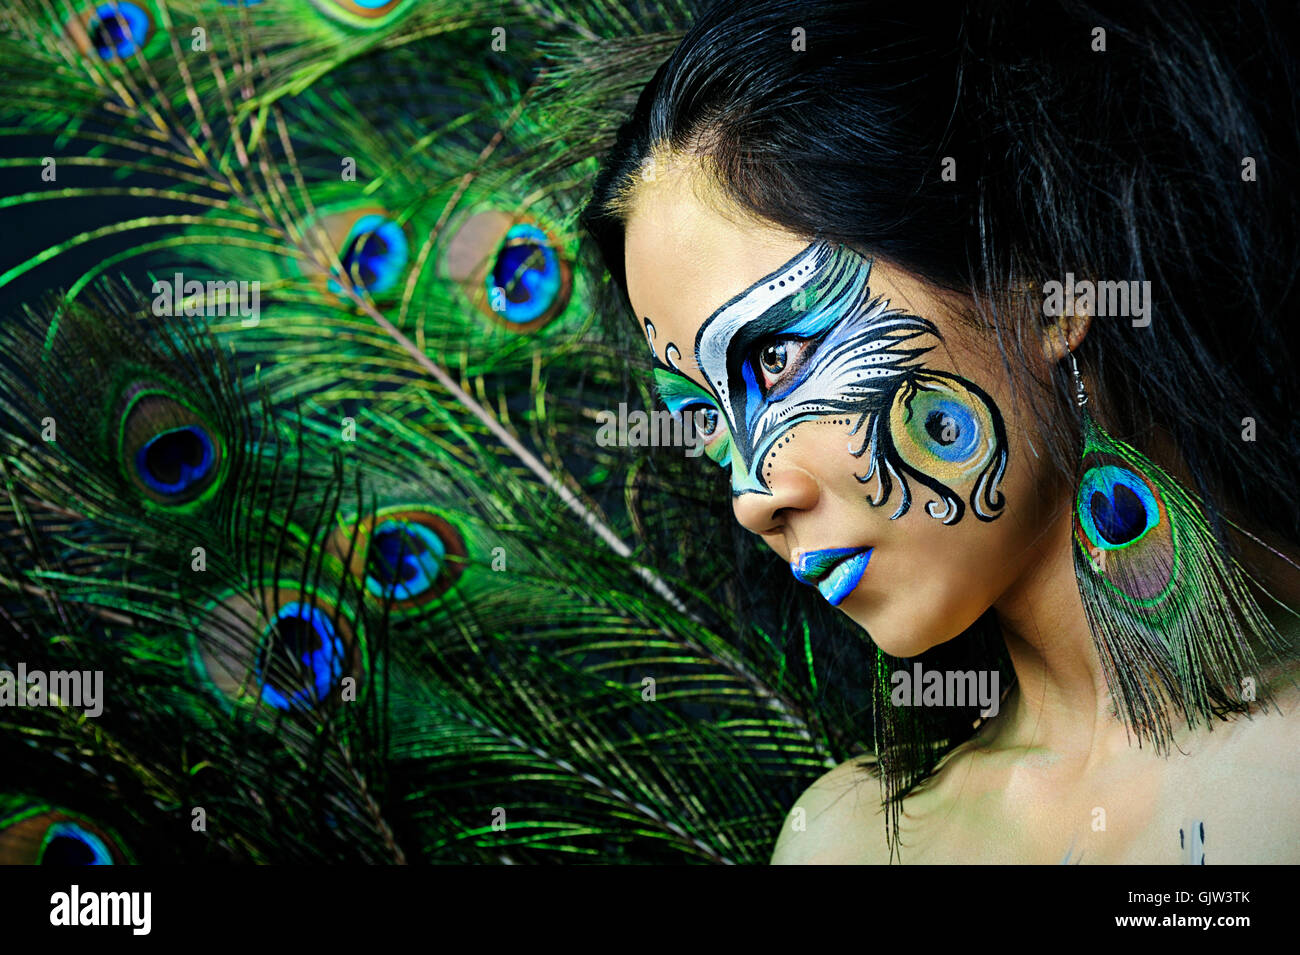 Peacock Feather Face Painting